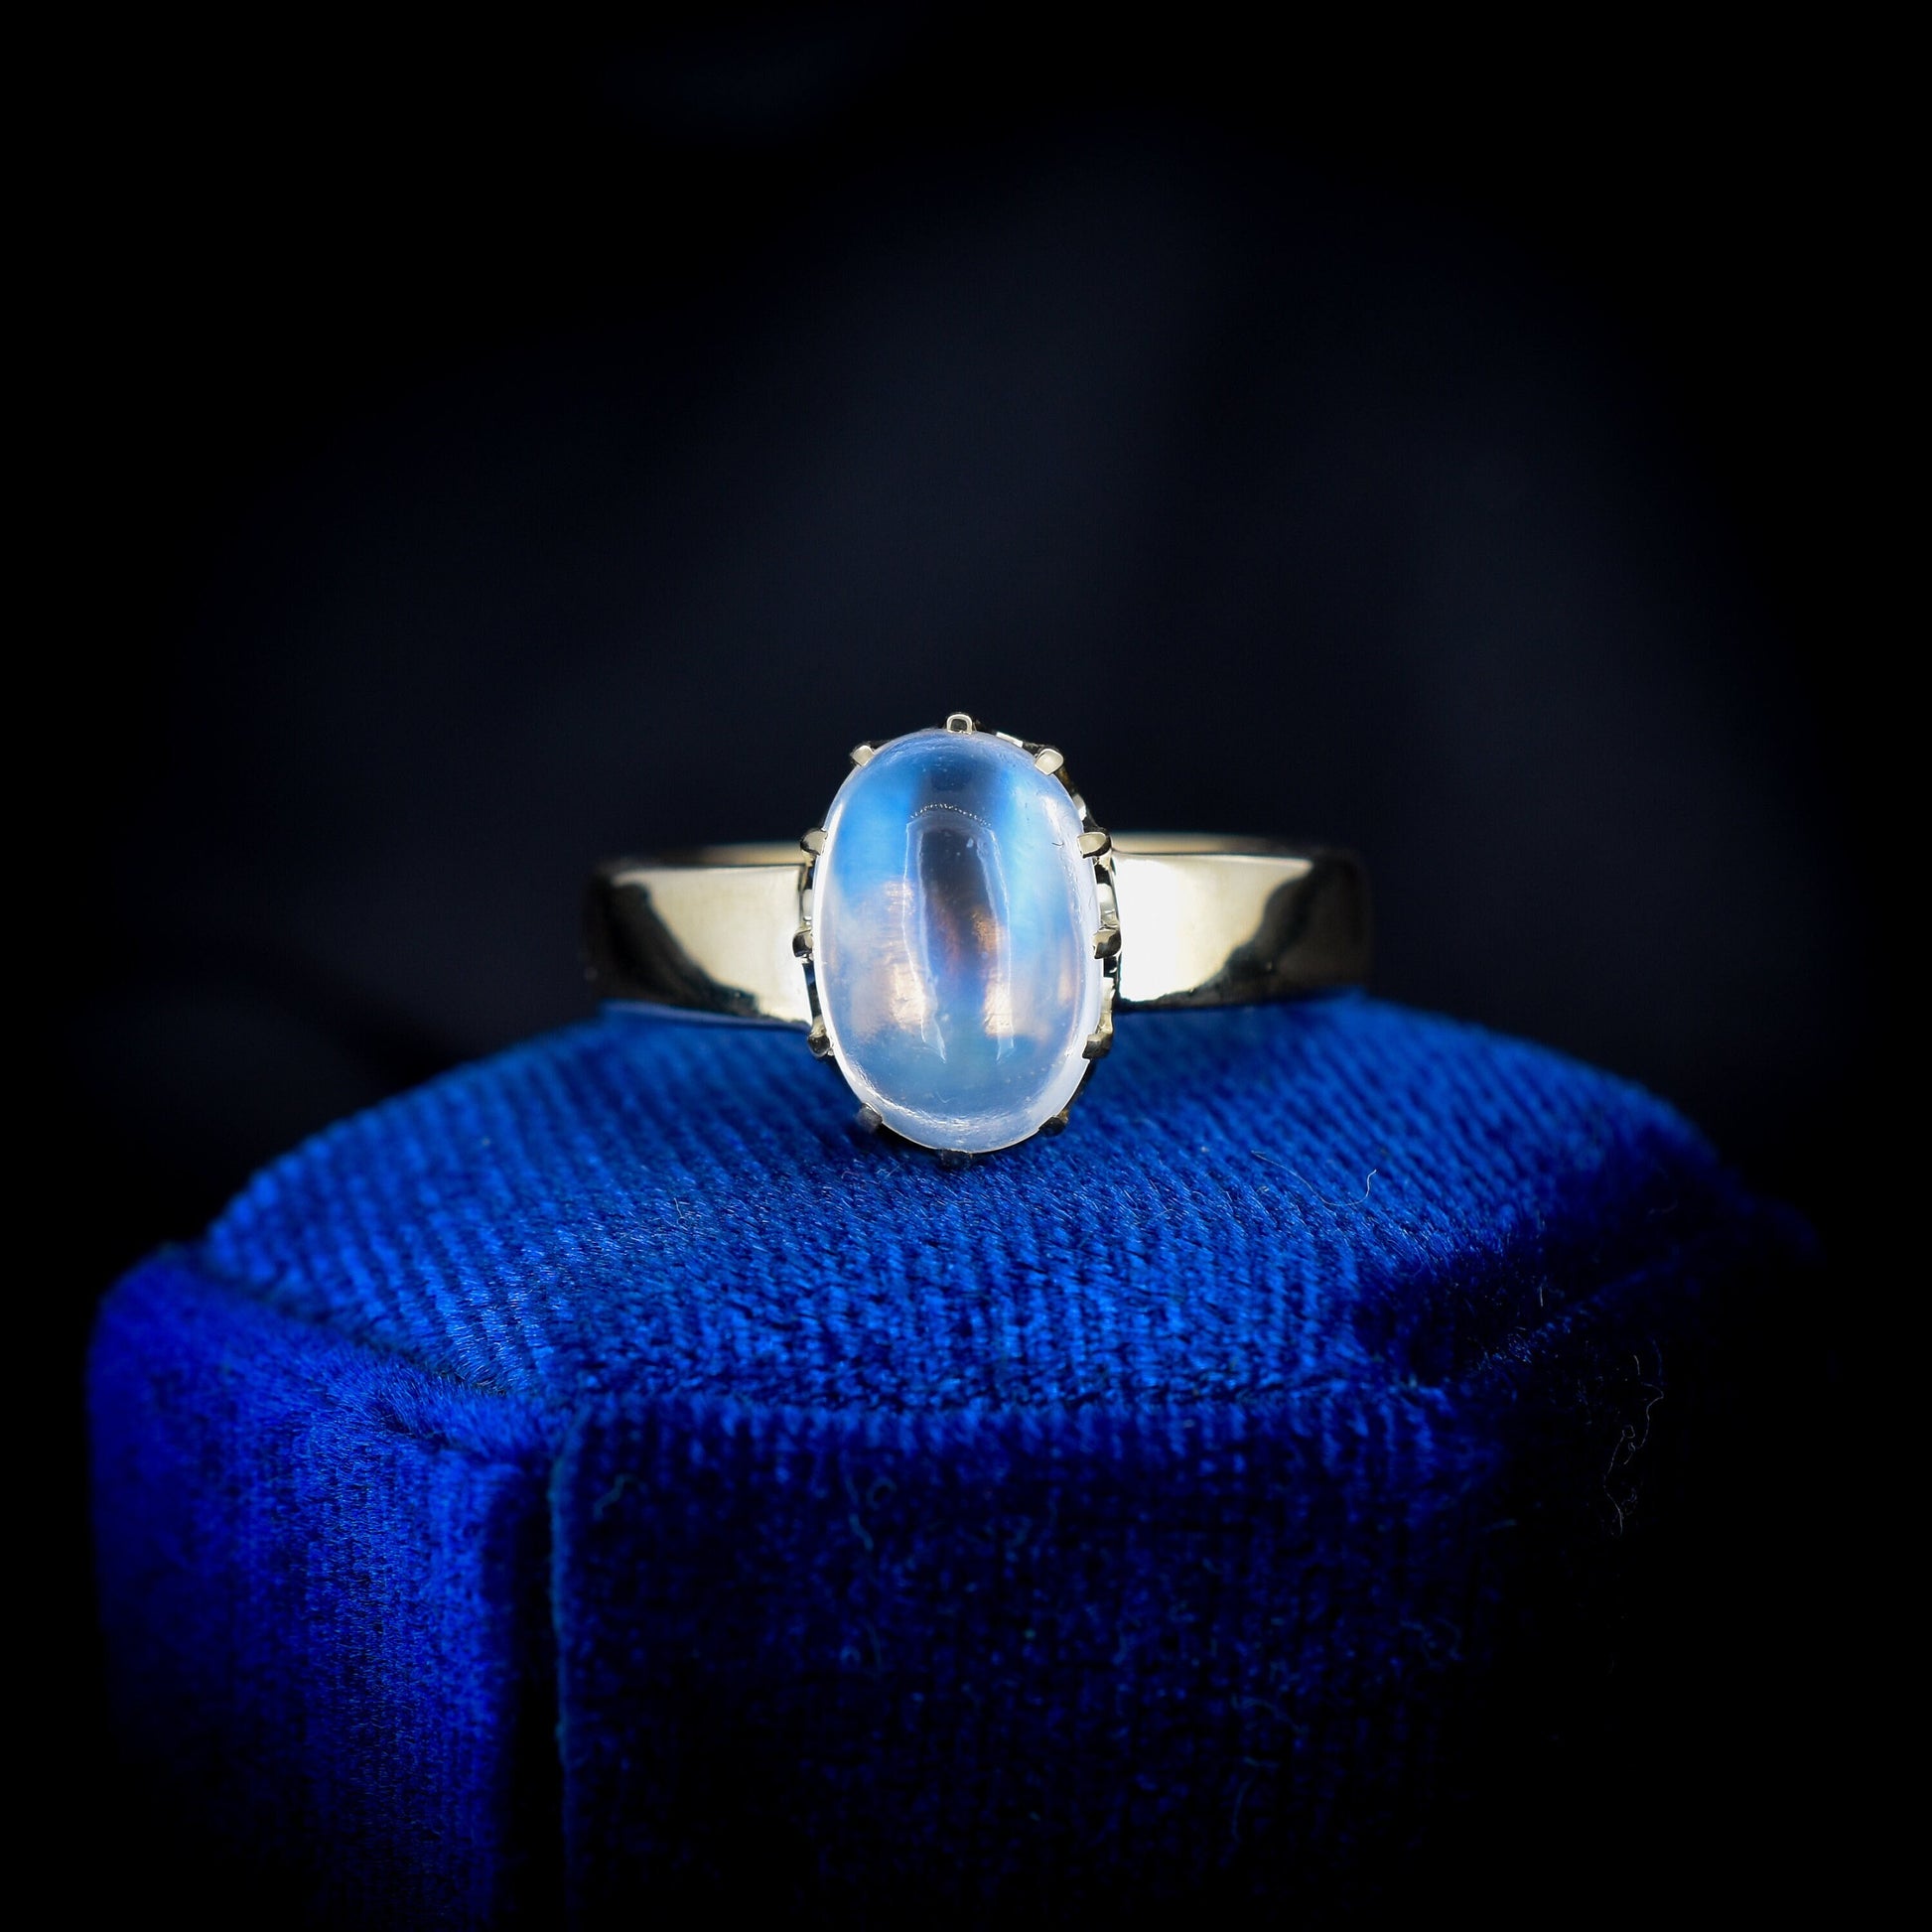 Vintage Cabochon Moonstone Oval Solitaire 18ct Yellow Gold Ring (8.4g)